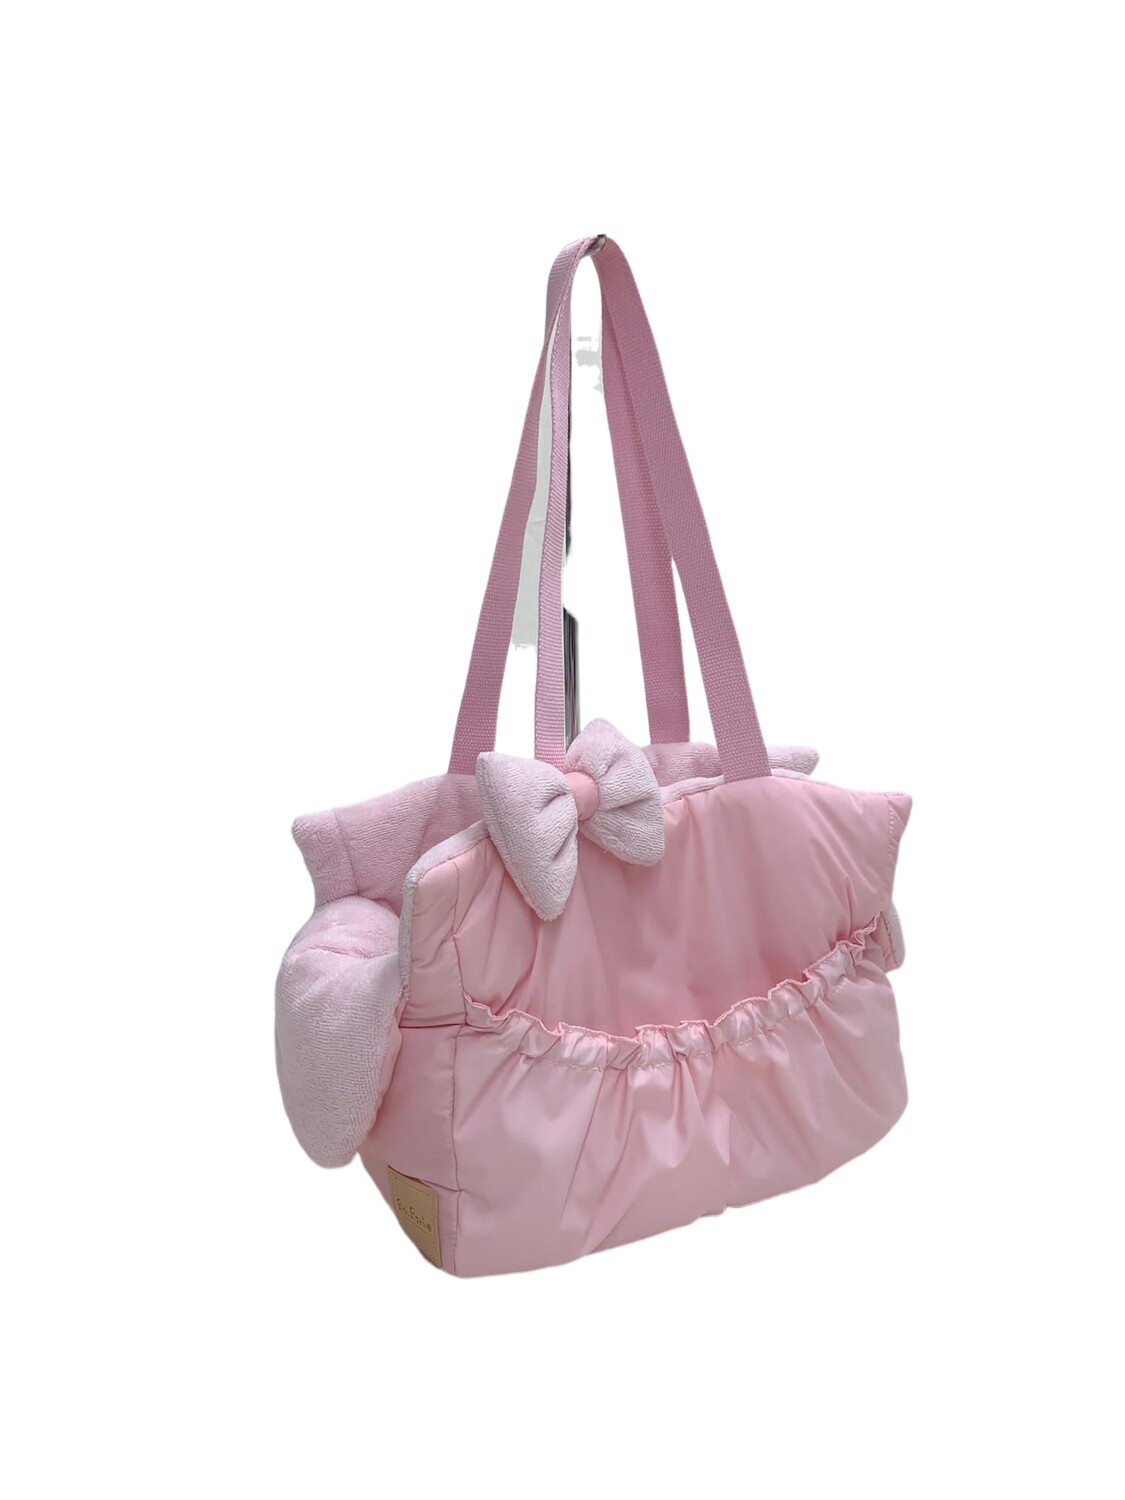 Coco Bag Pink bamboo Pink - Stock